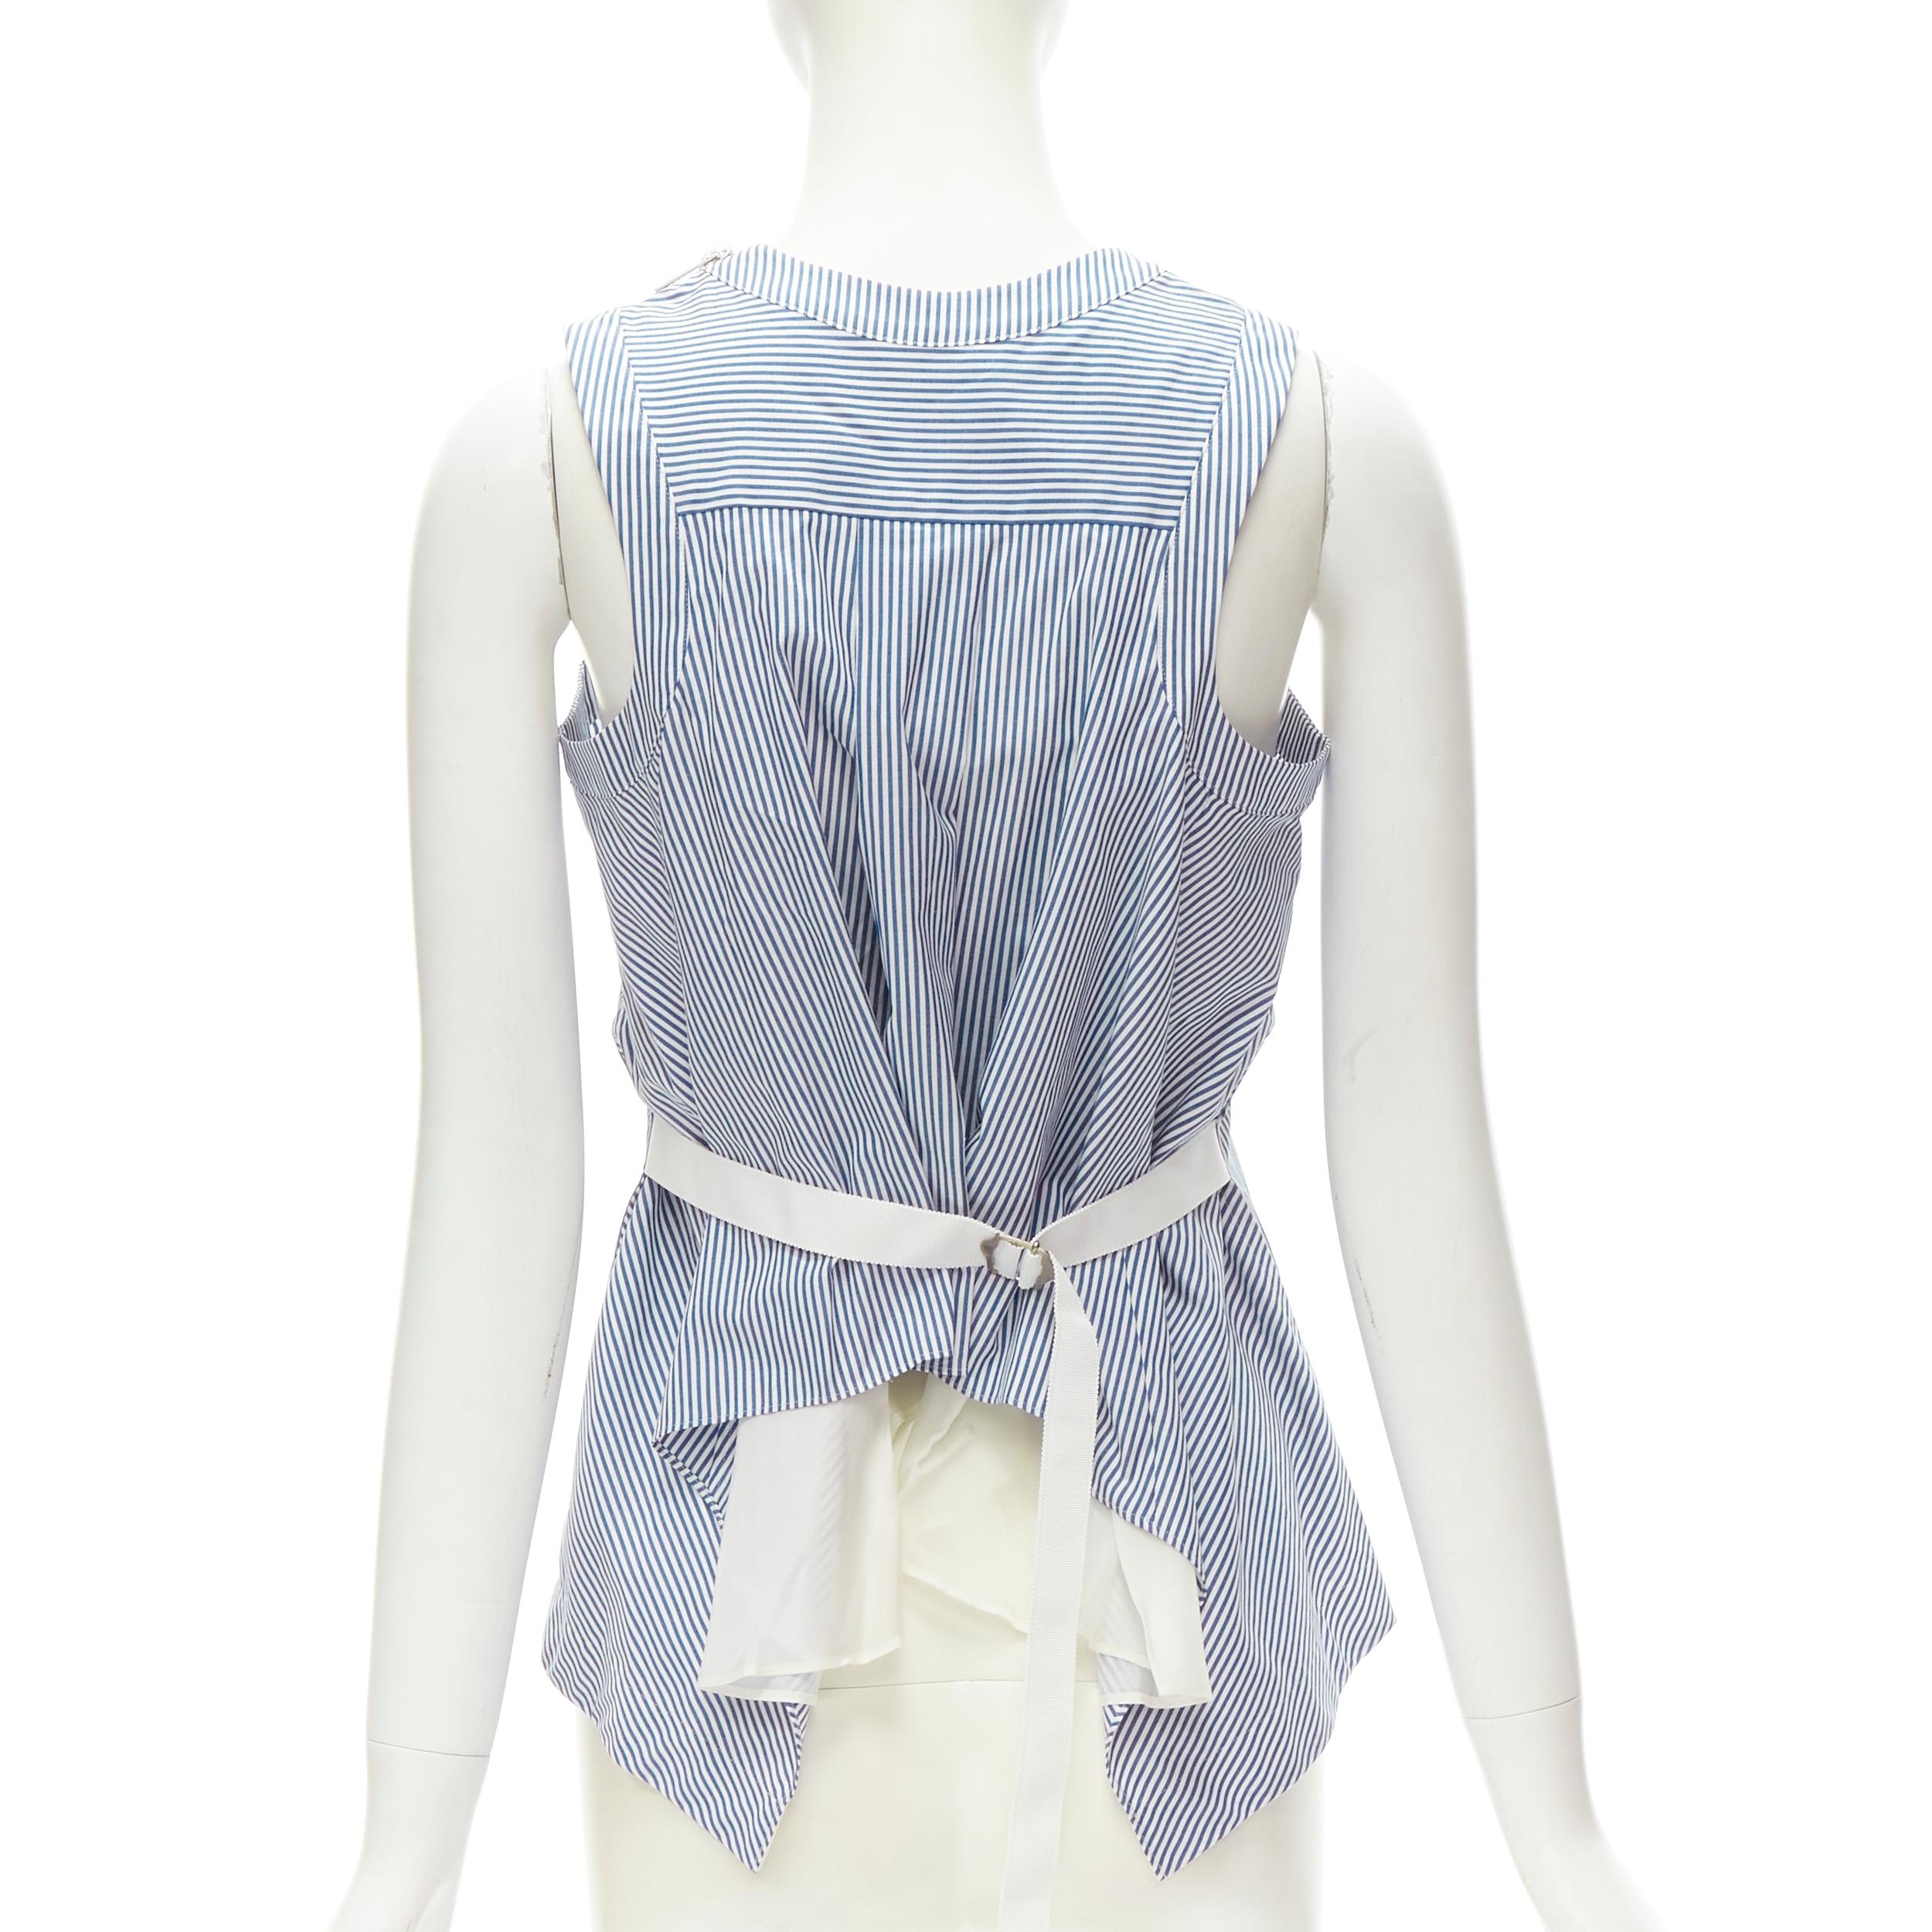 SACAI Chitose Abe blue striped cotton grosgrain belted layered back tank top S
Brand: Sacai
Designer: Chitose Abe
Material: Feels like cotton
Color: Blue
Pattern: Striped
Extra Detail: Grosgrain belted back. Curved cut at back exposing white